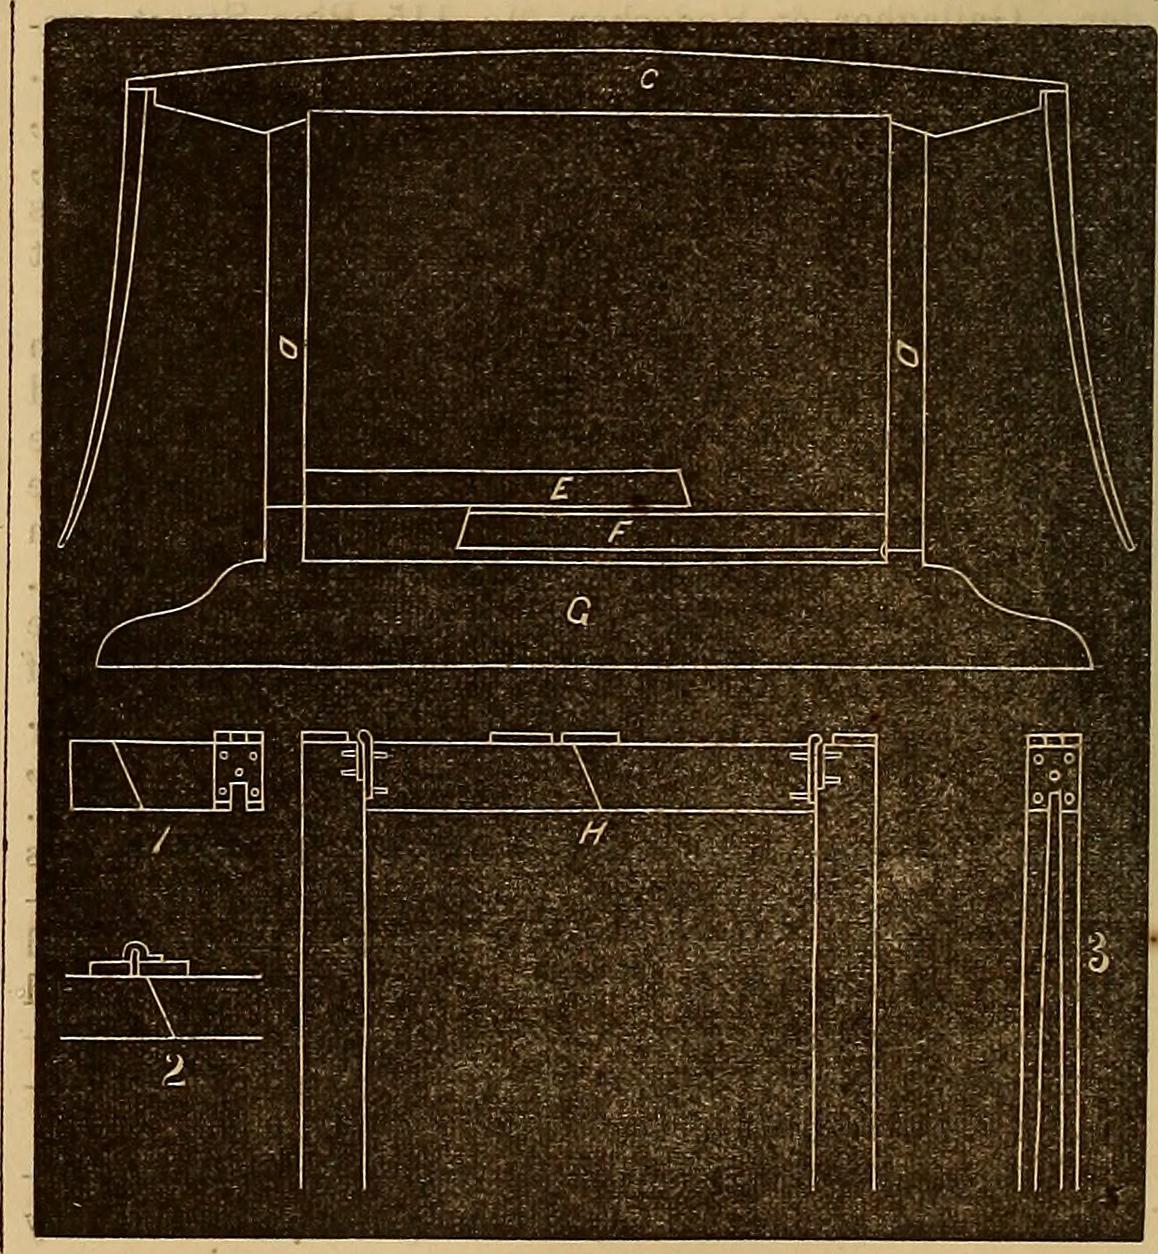 Image from page 29 of "The New York coach-maker's magazine" (1858)